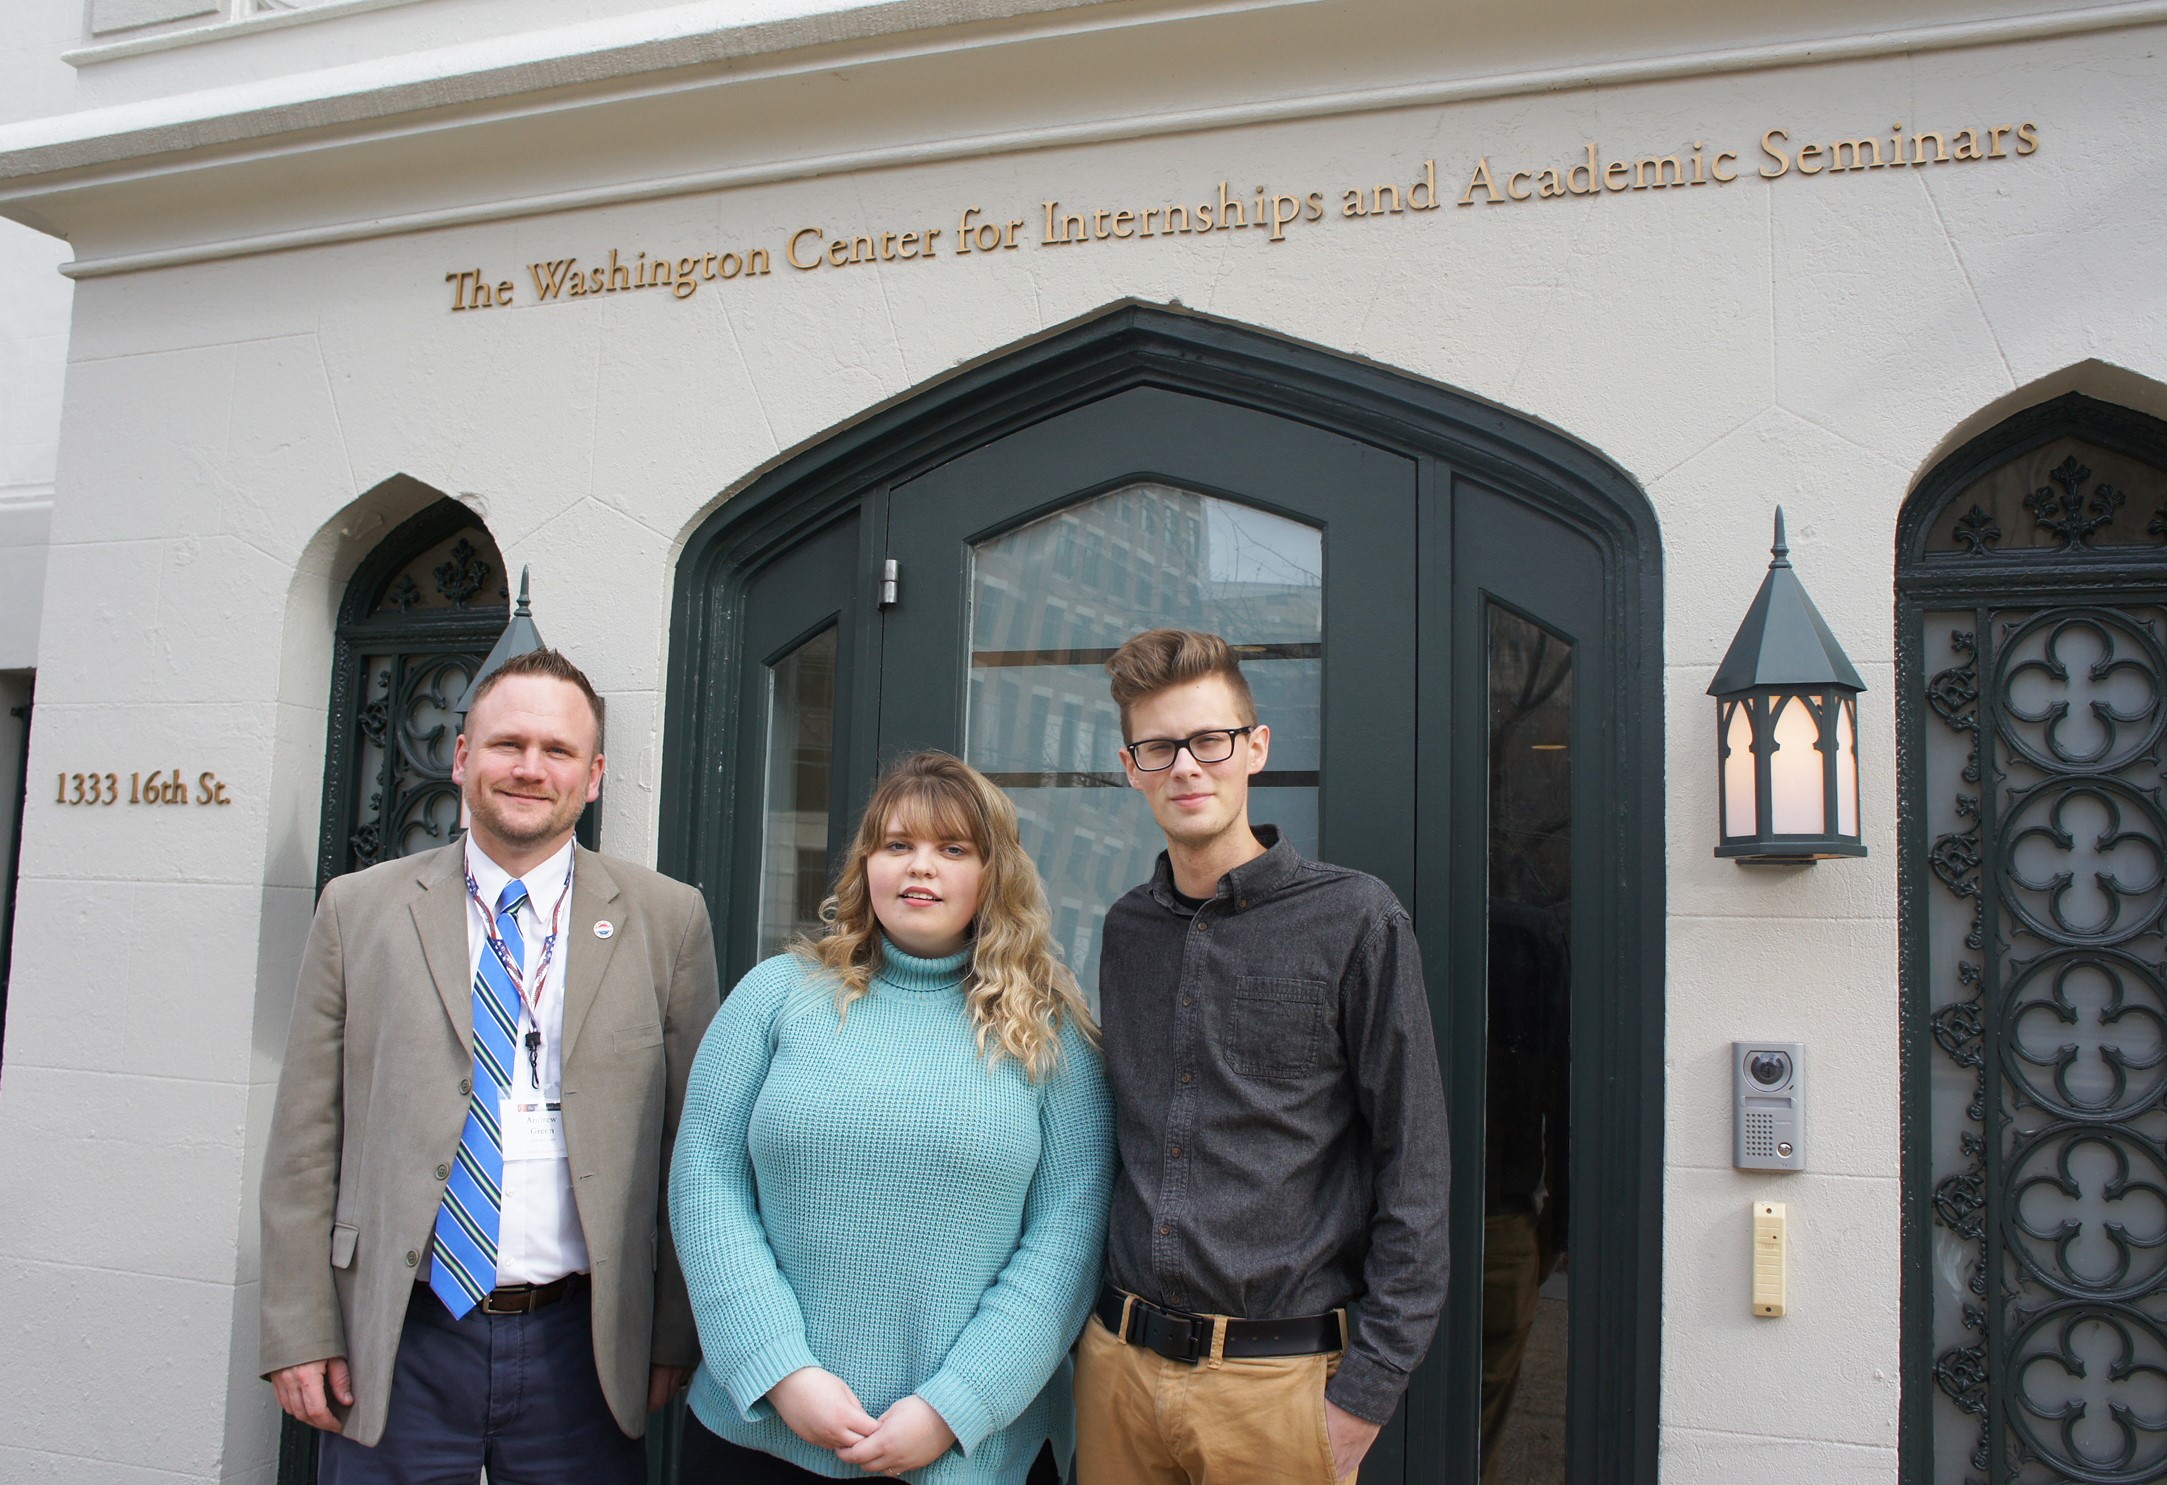 Central College professor Andrew Green attends the Washington Center’s 2017 Presidential Inauguration Seminar in Washington, D.C., with students Hannah Hirl and Andrew Brouwer of Oskaloosa, Iowa. The two-week program challenges students to elevate political discourse and pursue bipartisan cooperation